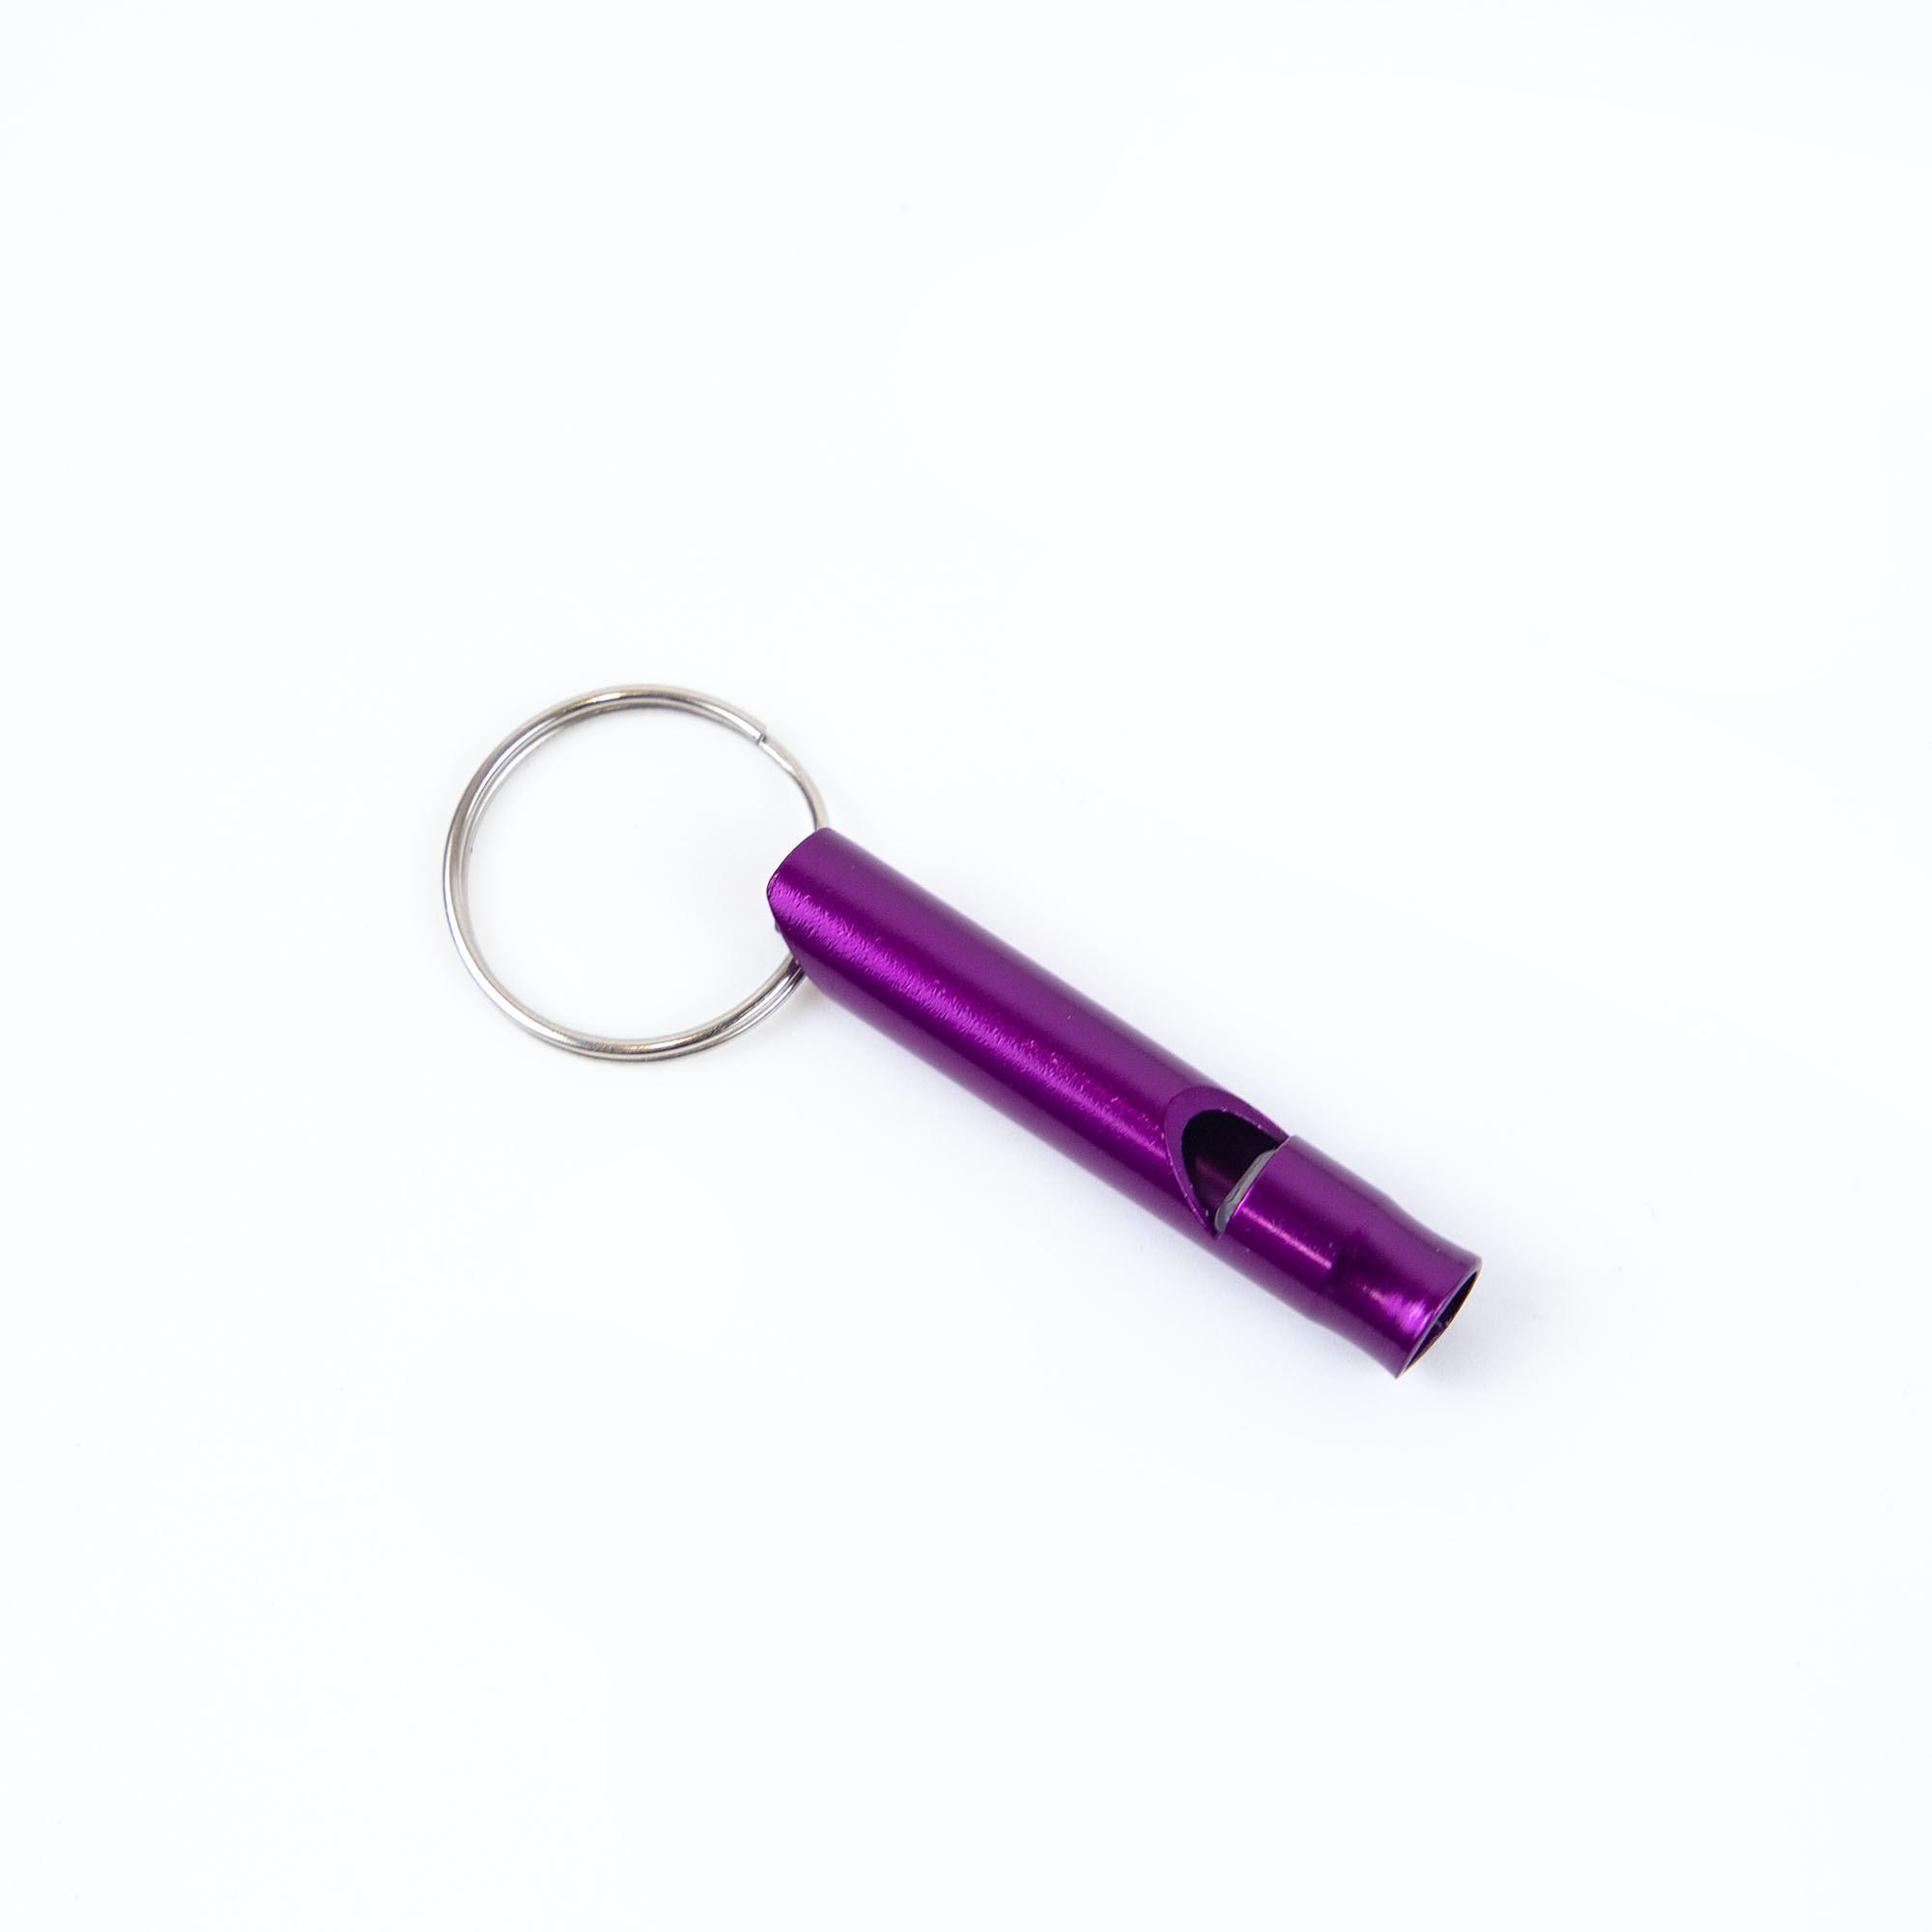 Self Defense Keychain Suit Personal Keychain For Girls Women Safety Key Ring  With Hand Sanitizer Bottle Holder Pompom Whistle - CJdropshipping